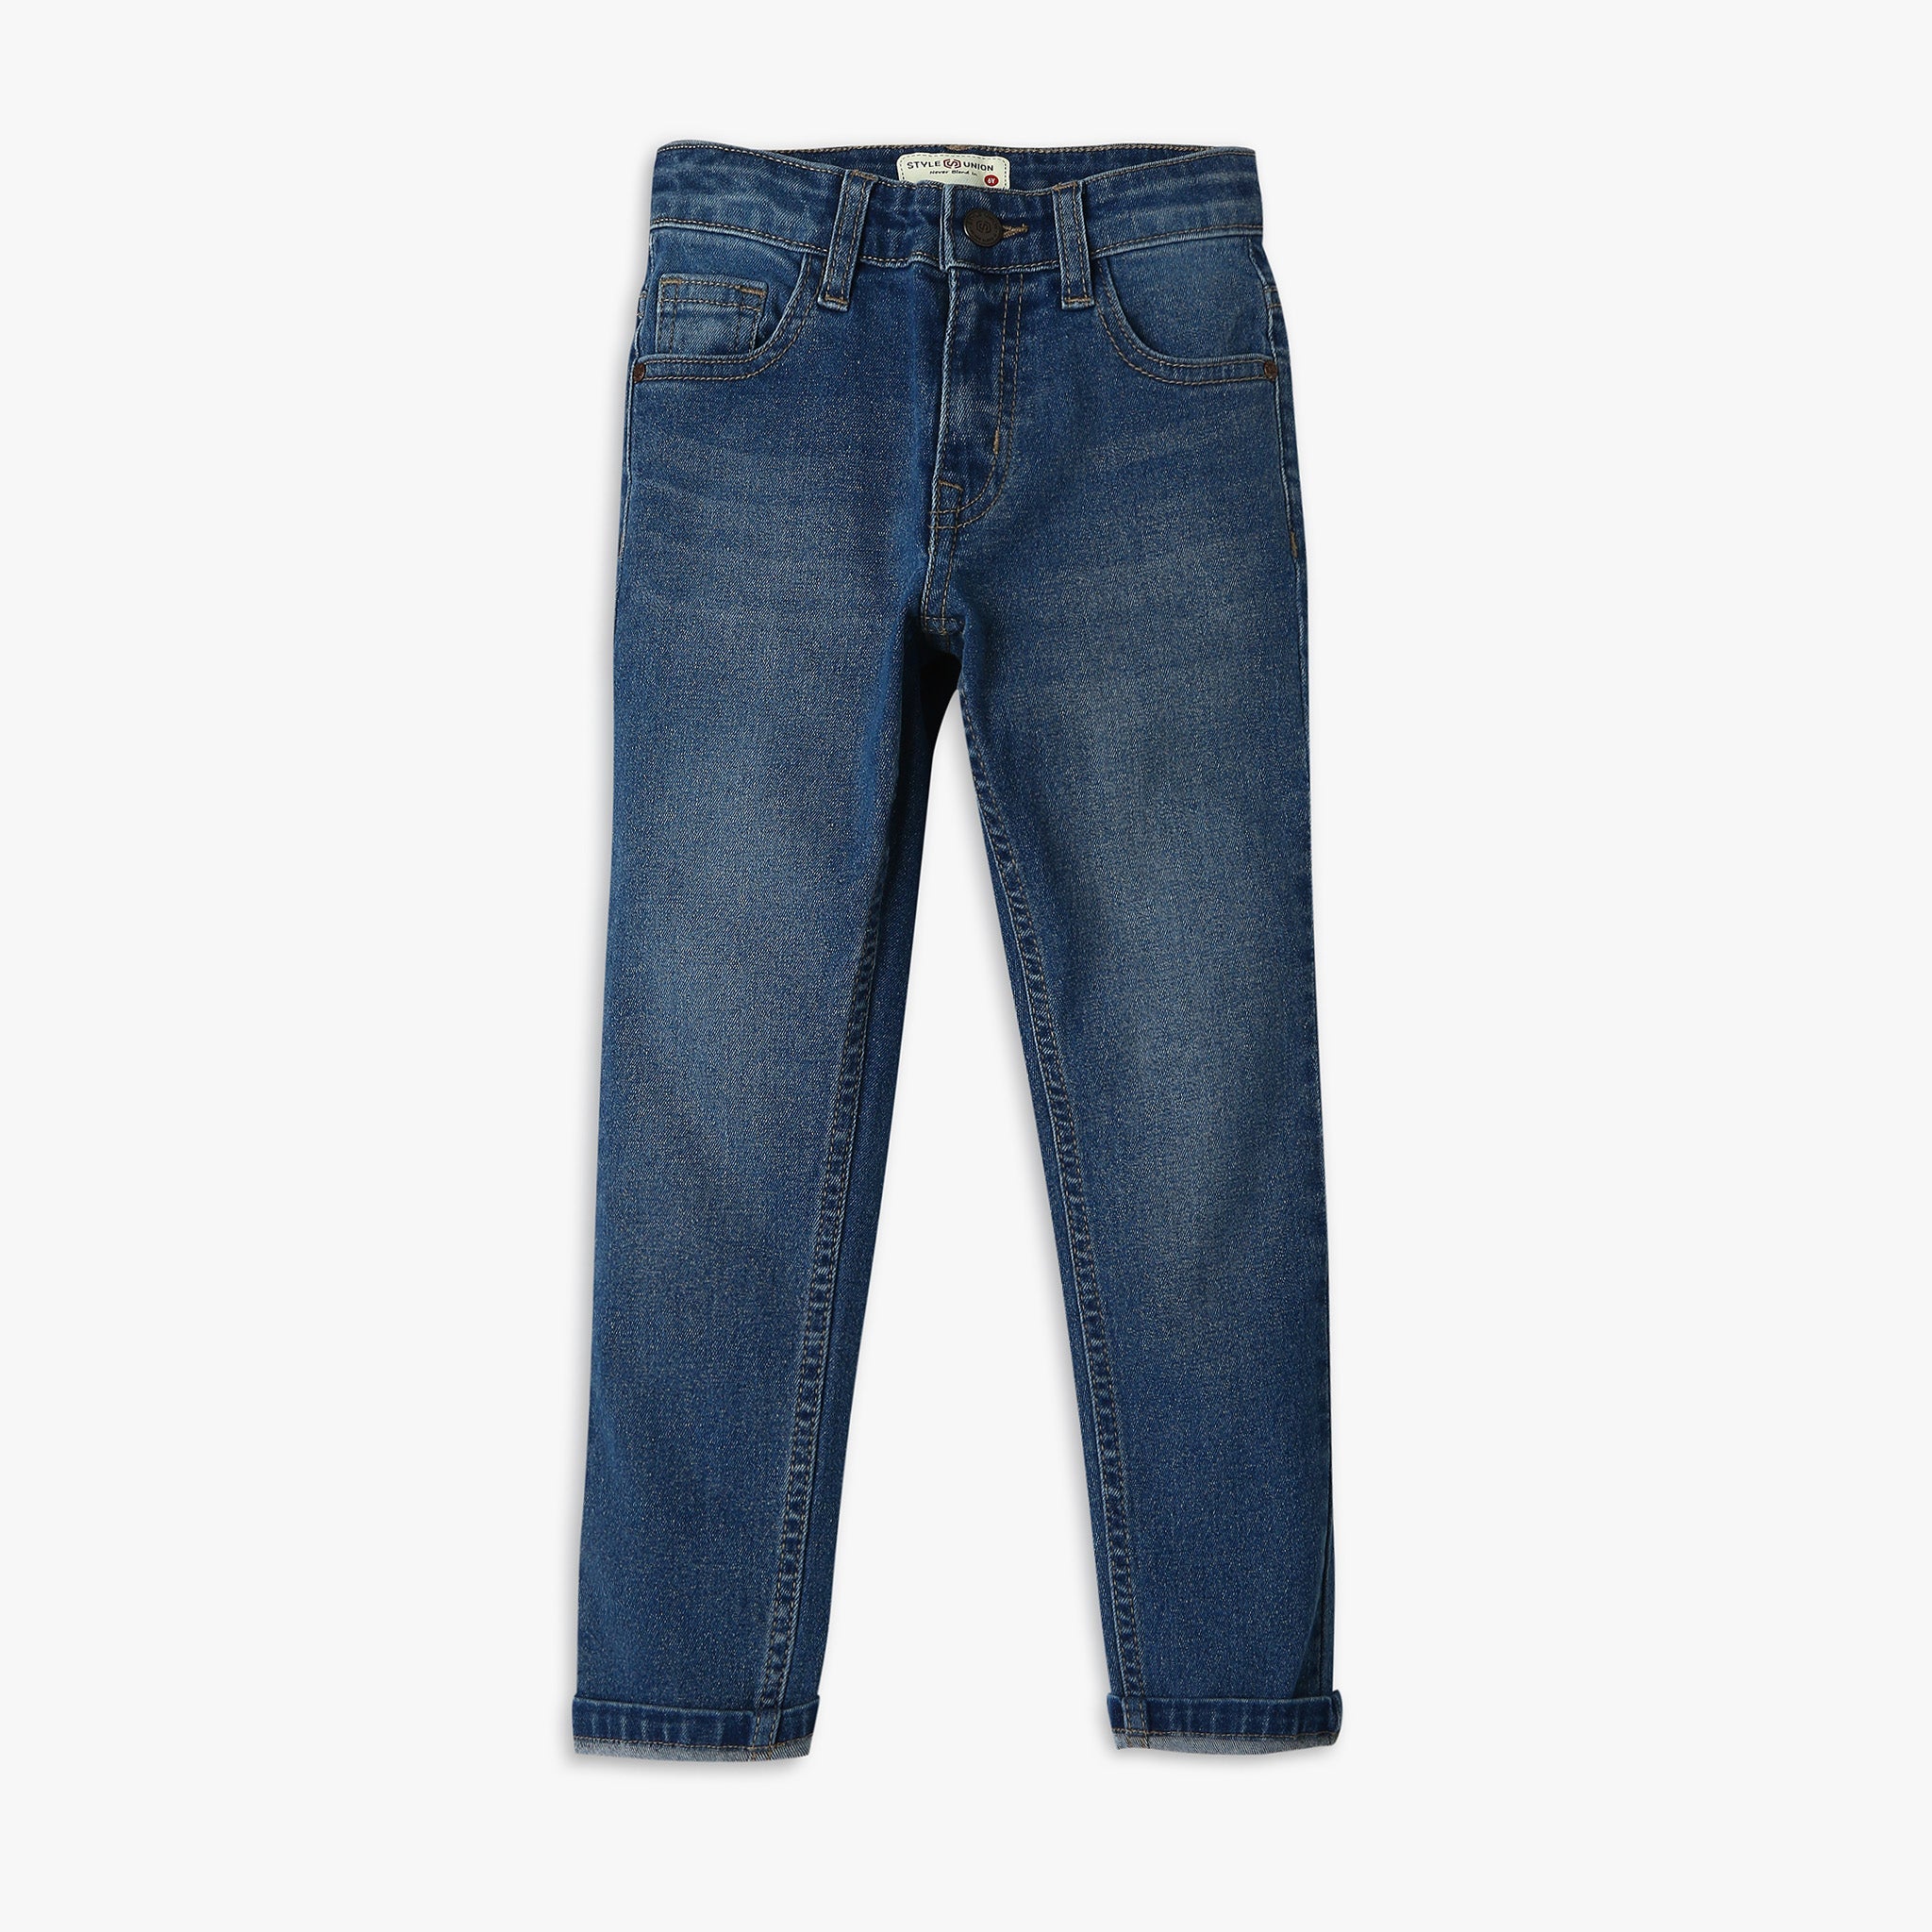 Jeans For Boys: Buy Boy's Jeans & Pants Online in India - Style Union